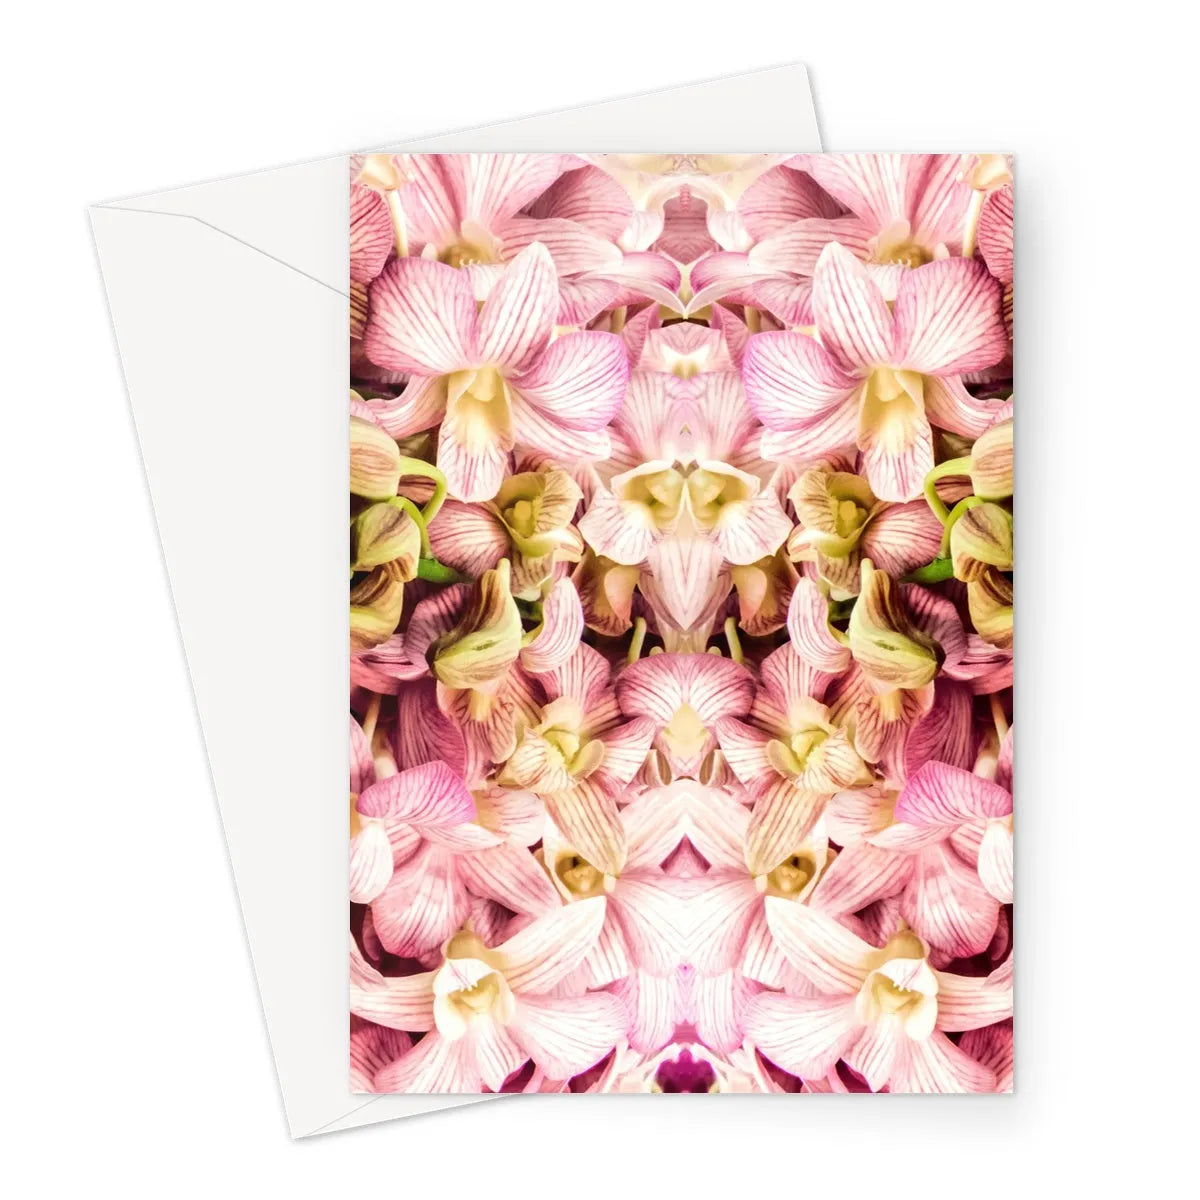 Pretty In Pink Greeting Card - A5 Portrait / 1 Card - Greeting & Note Cards - Aesthetic Art